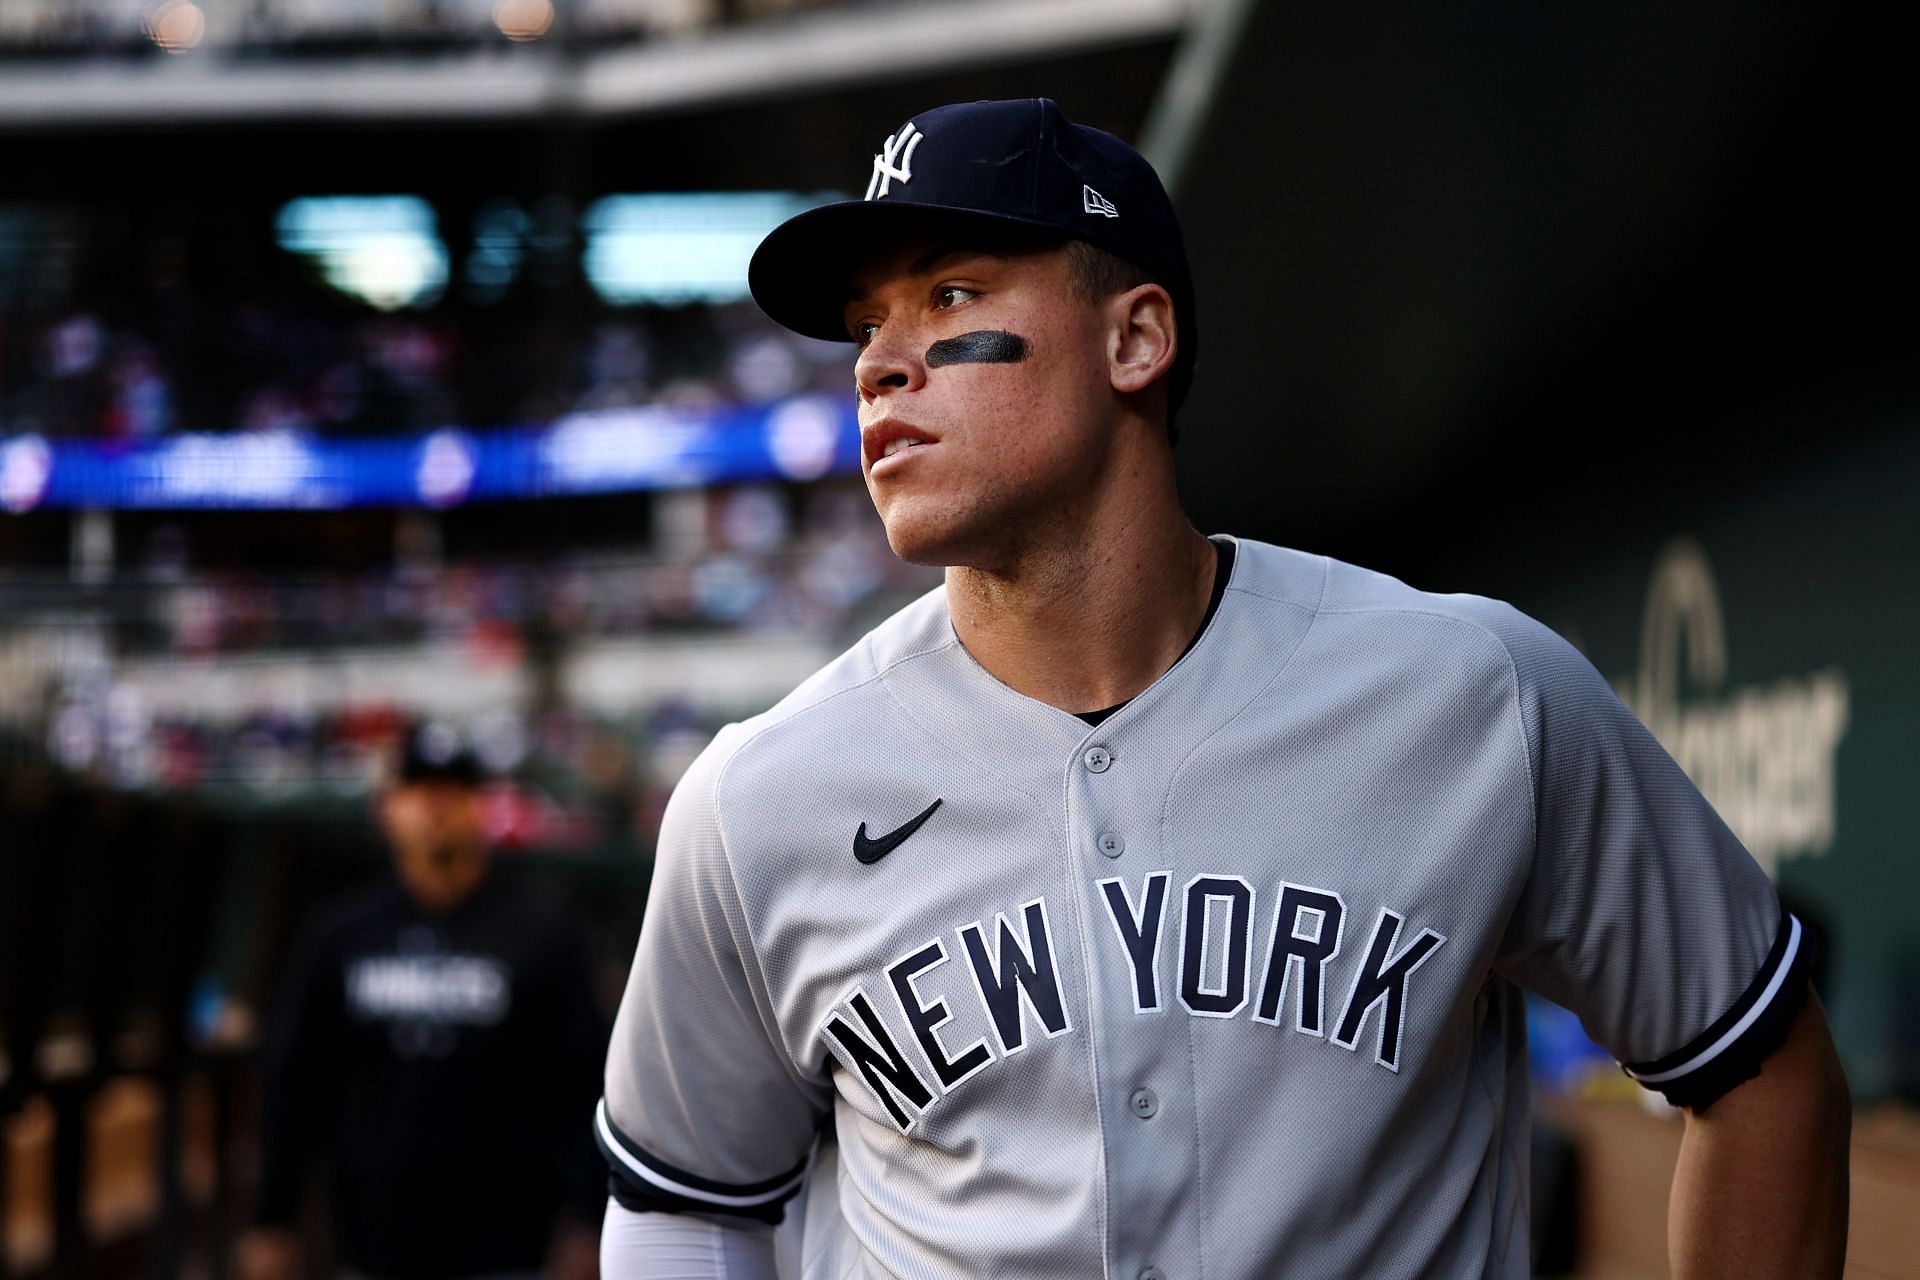 New York Yankees fans livid as Aaron Judge leaves game with hip